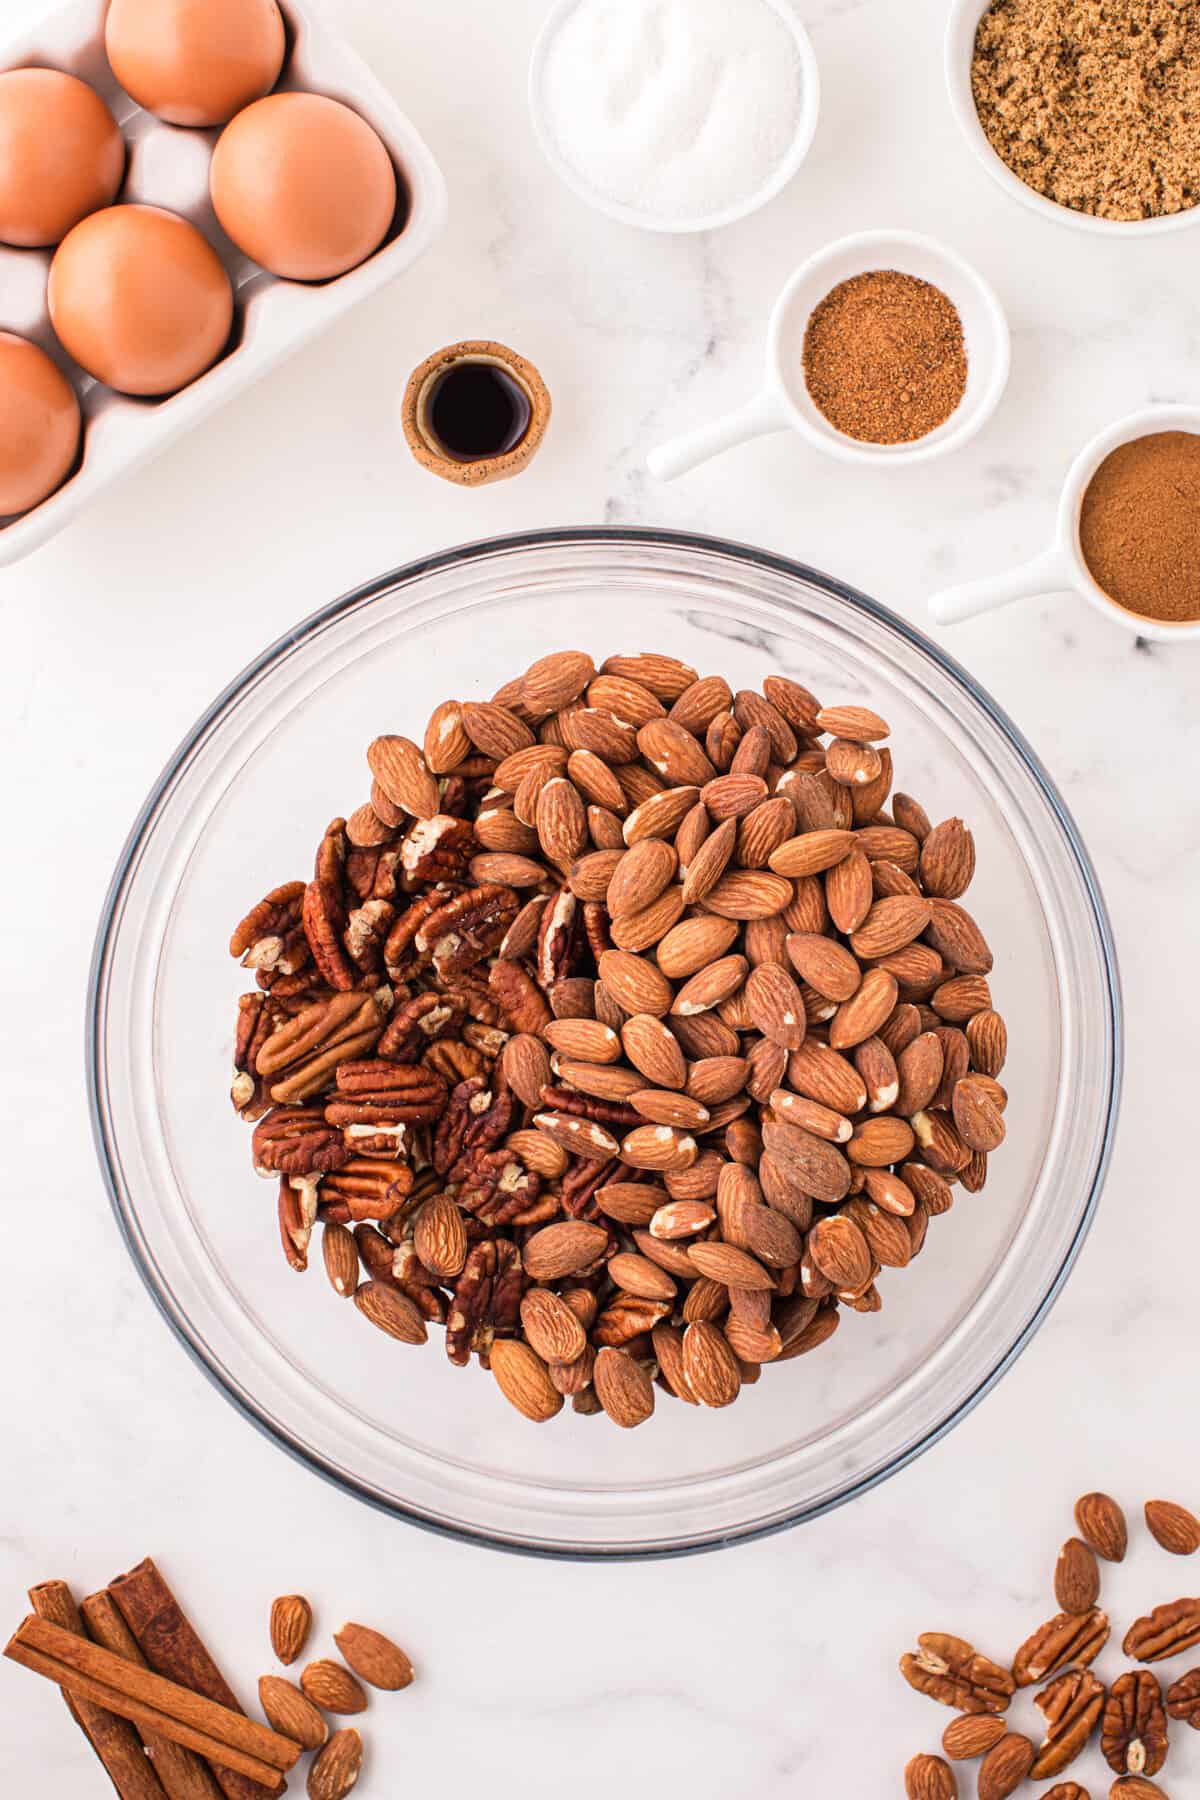 Raw almonds and pecan halves in a glass mixing bowl.